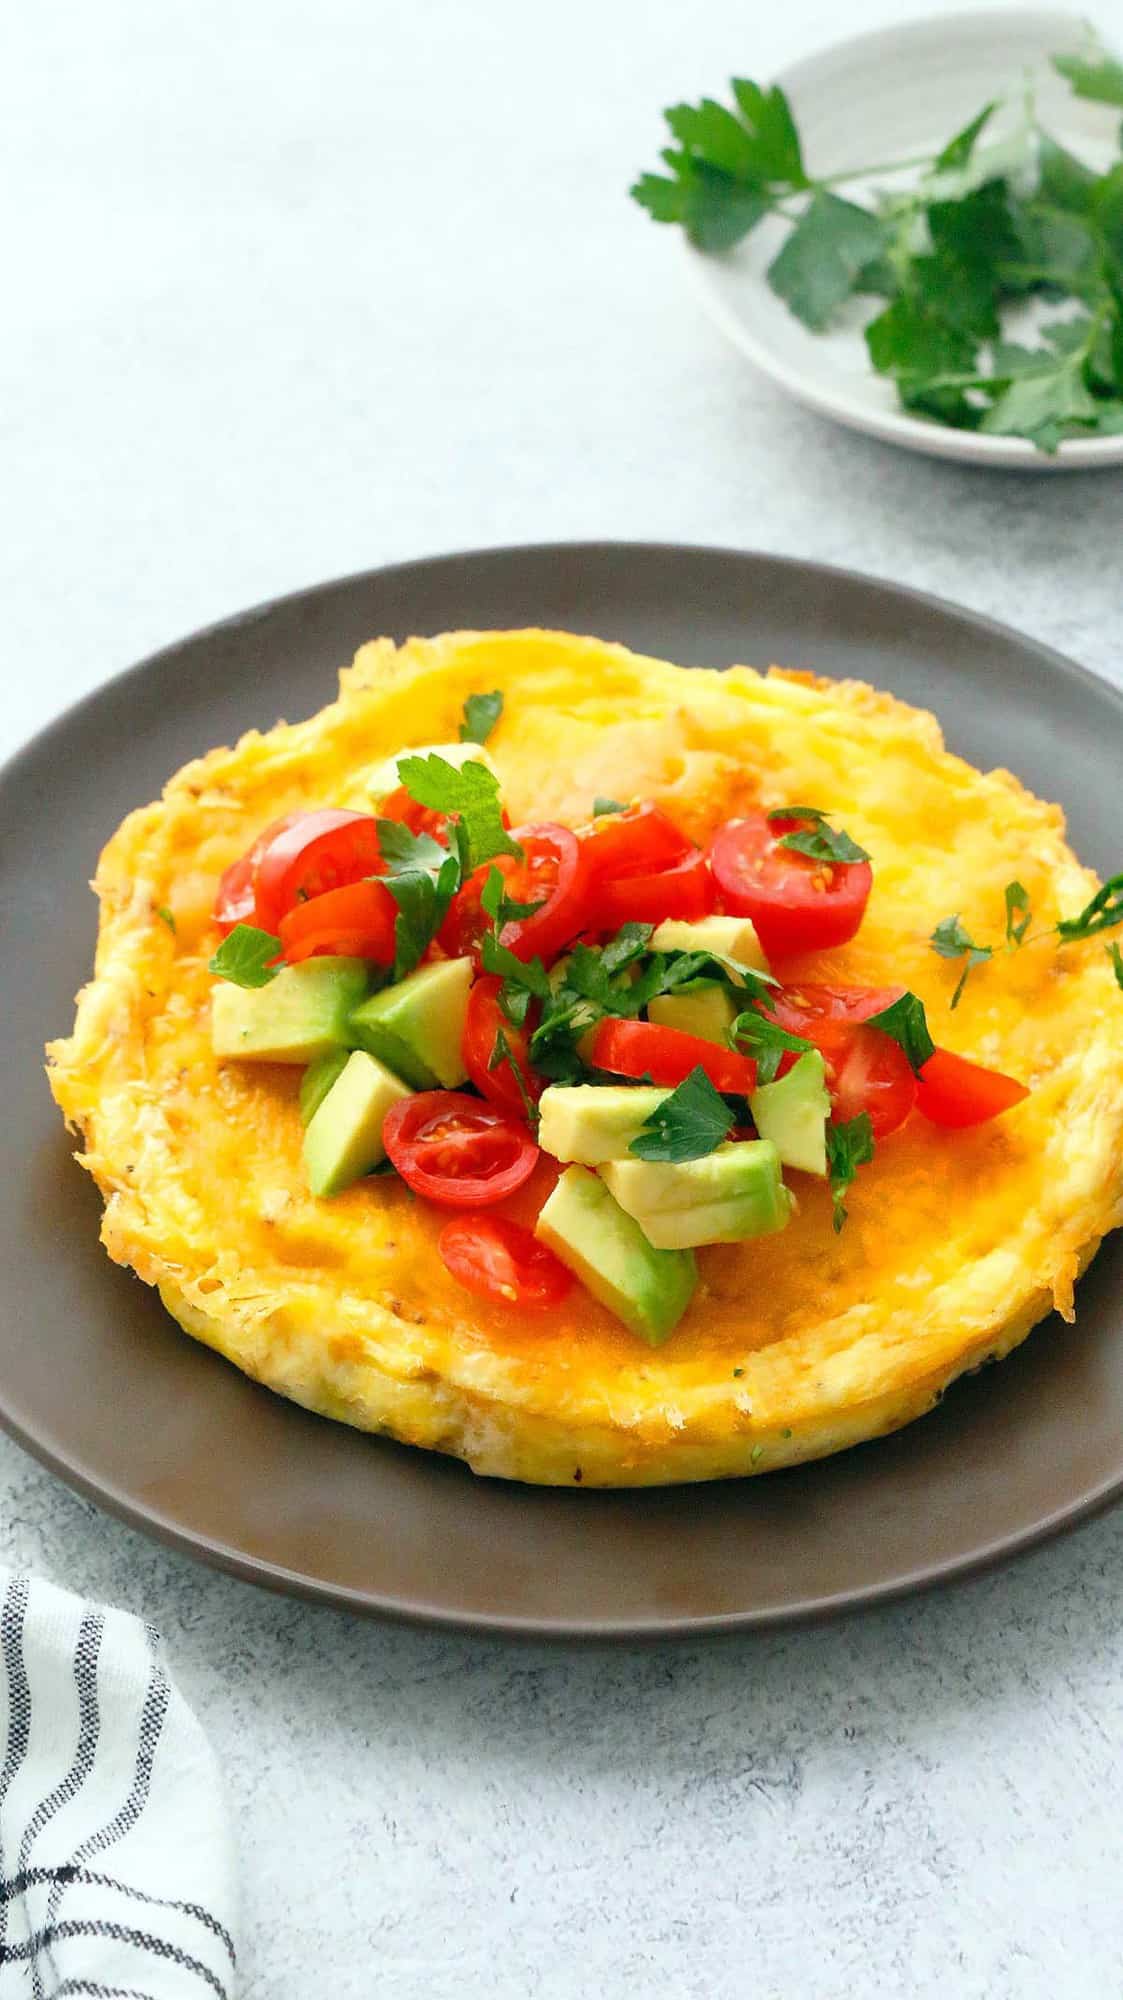 egg omelette topped with tomato and avocado on a brown plate 